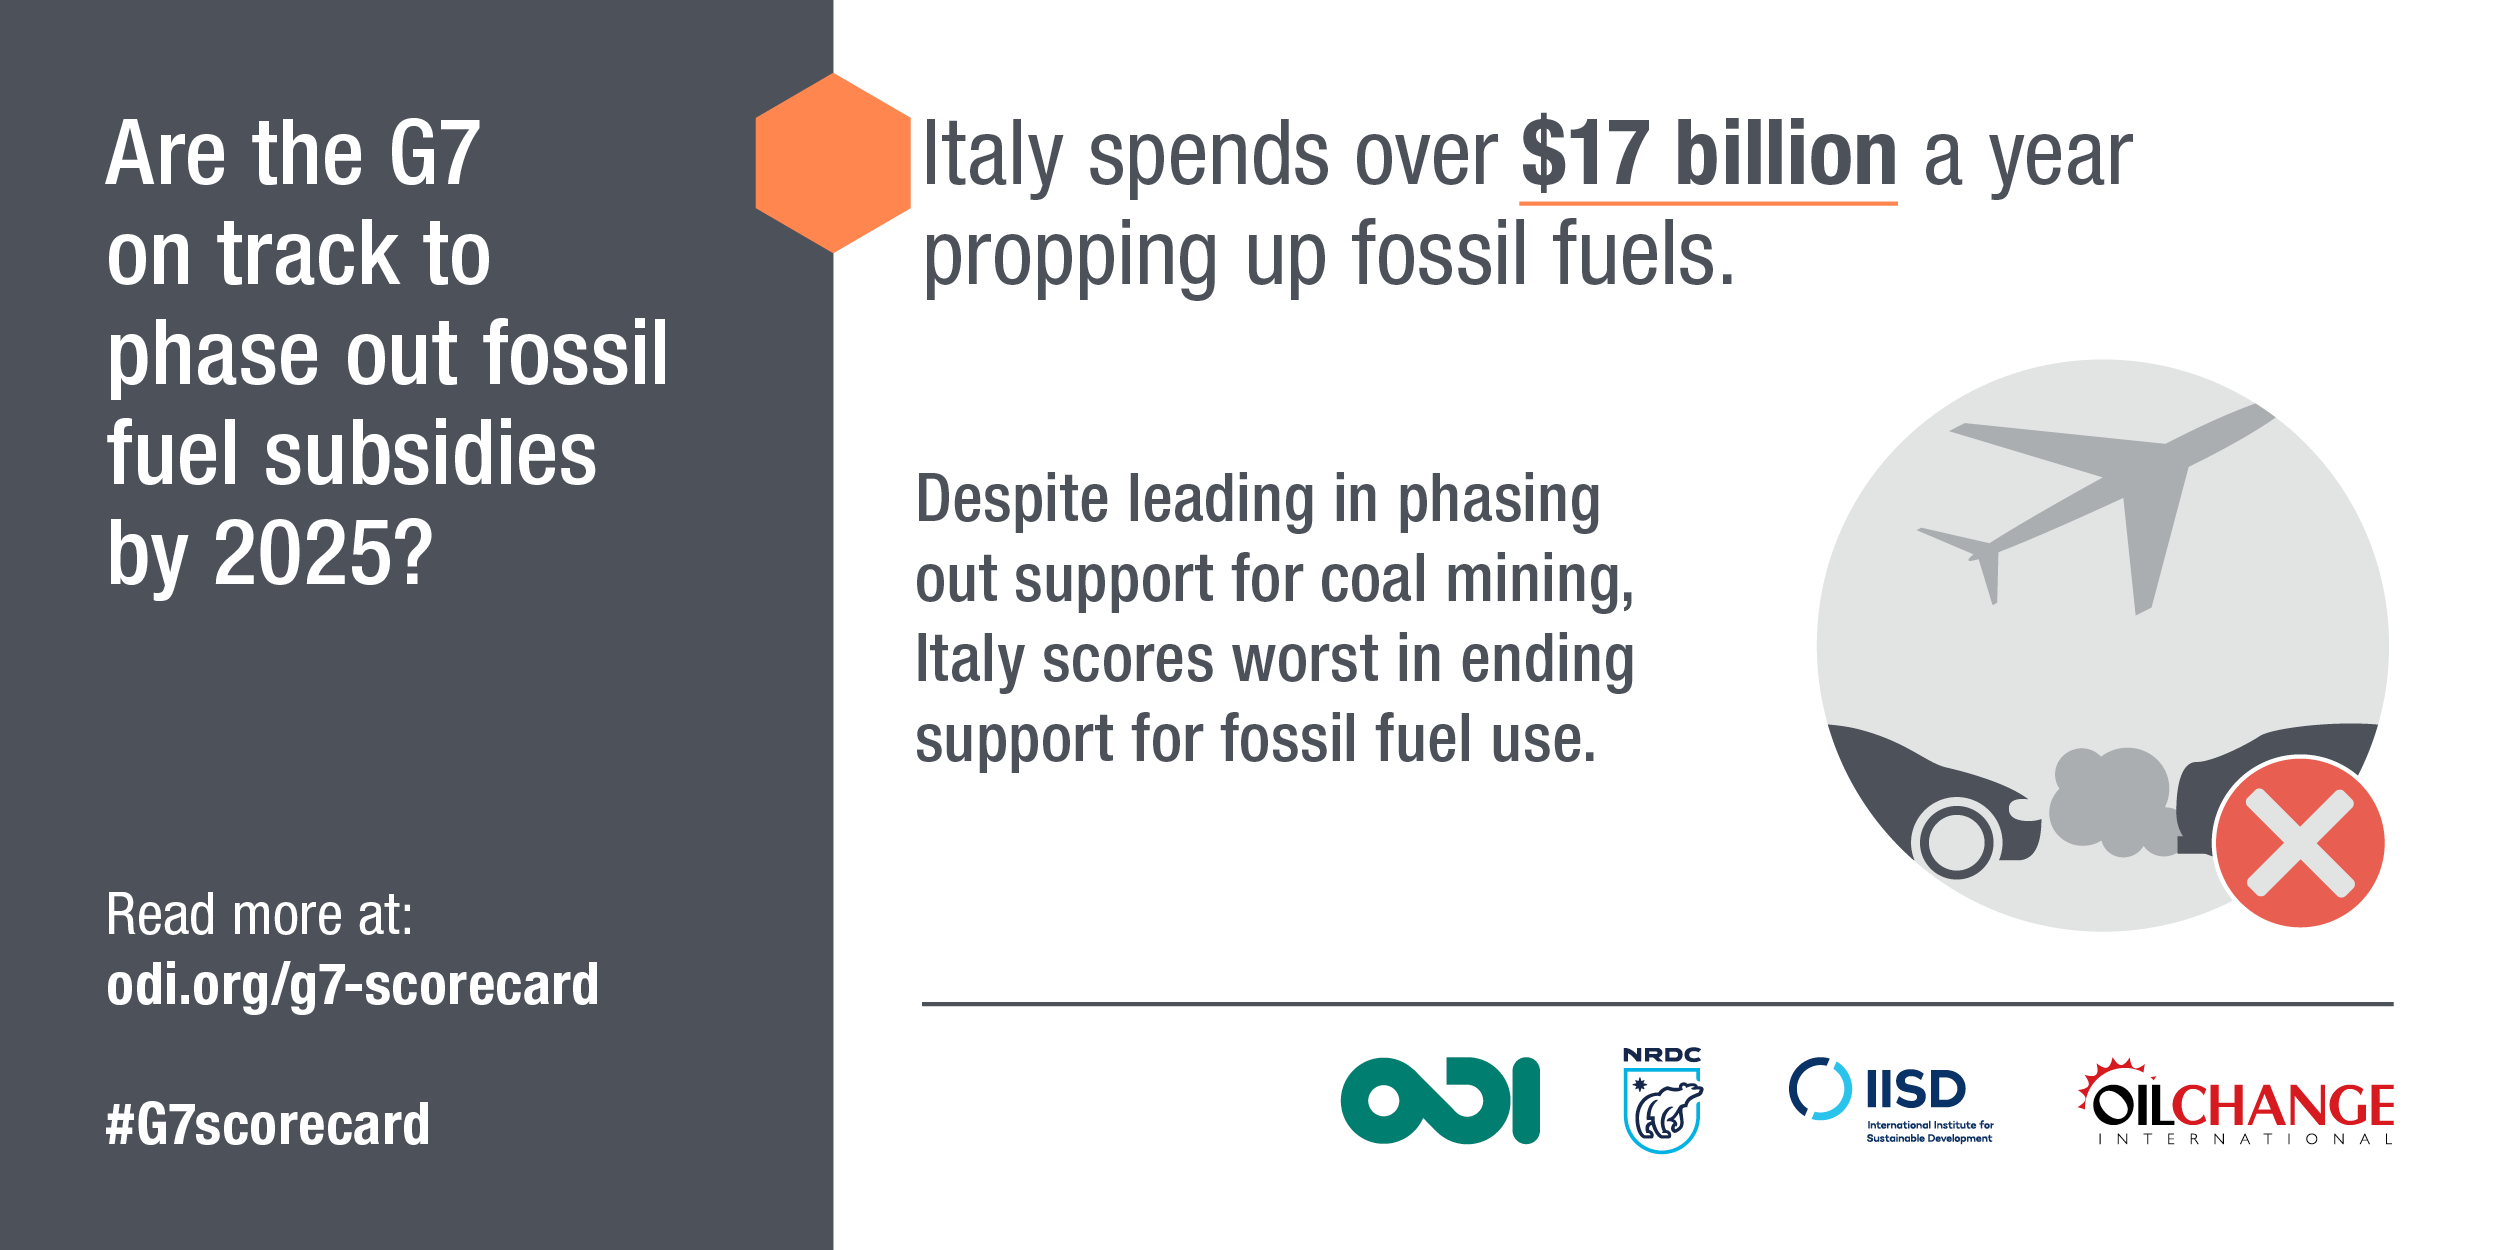 Italy spends over $17 billion a year propping up fossil fuels. Image: ODI